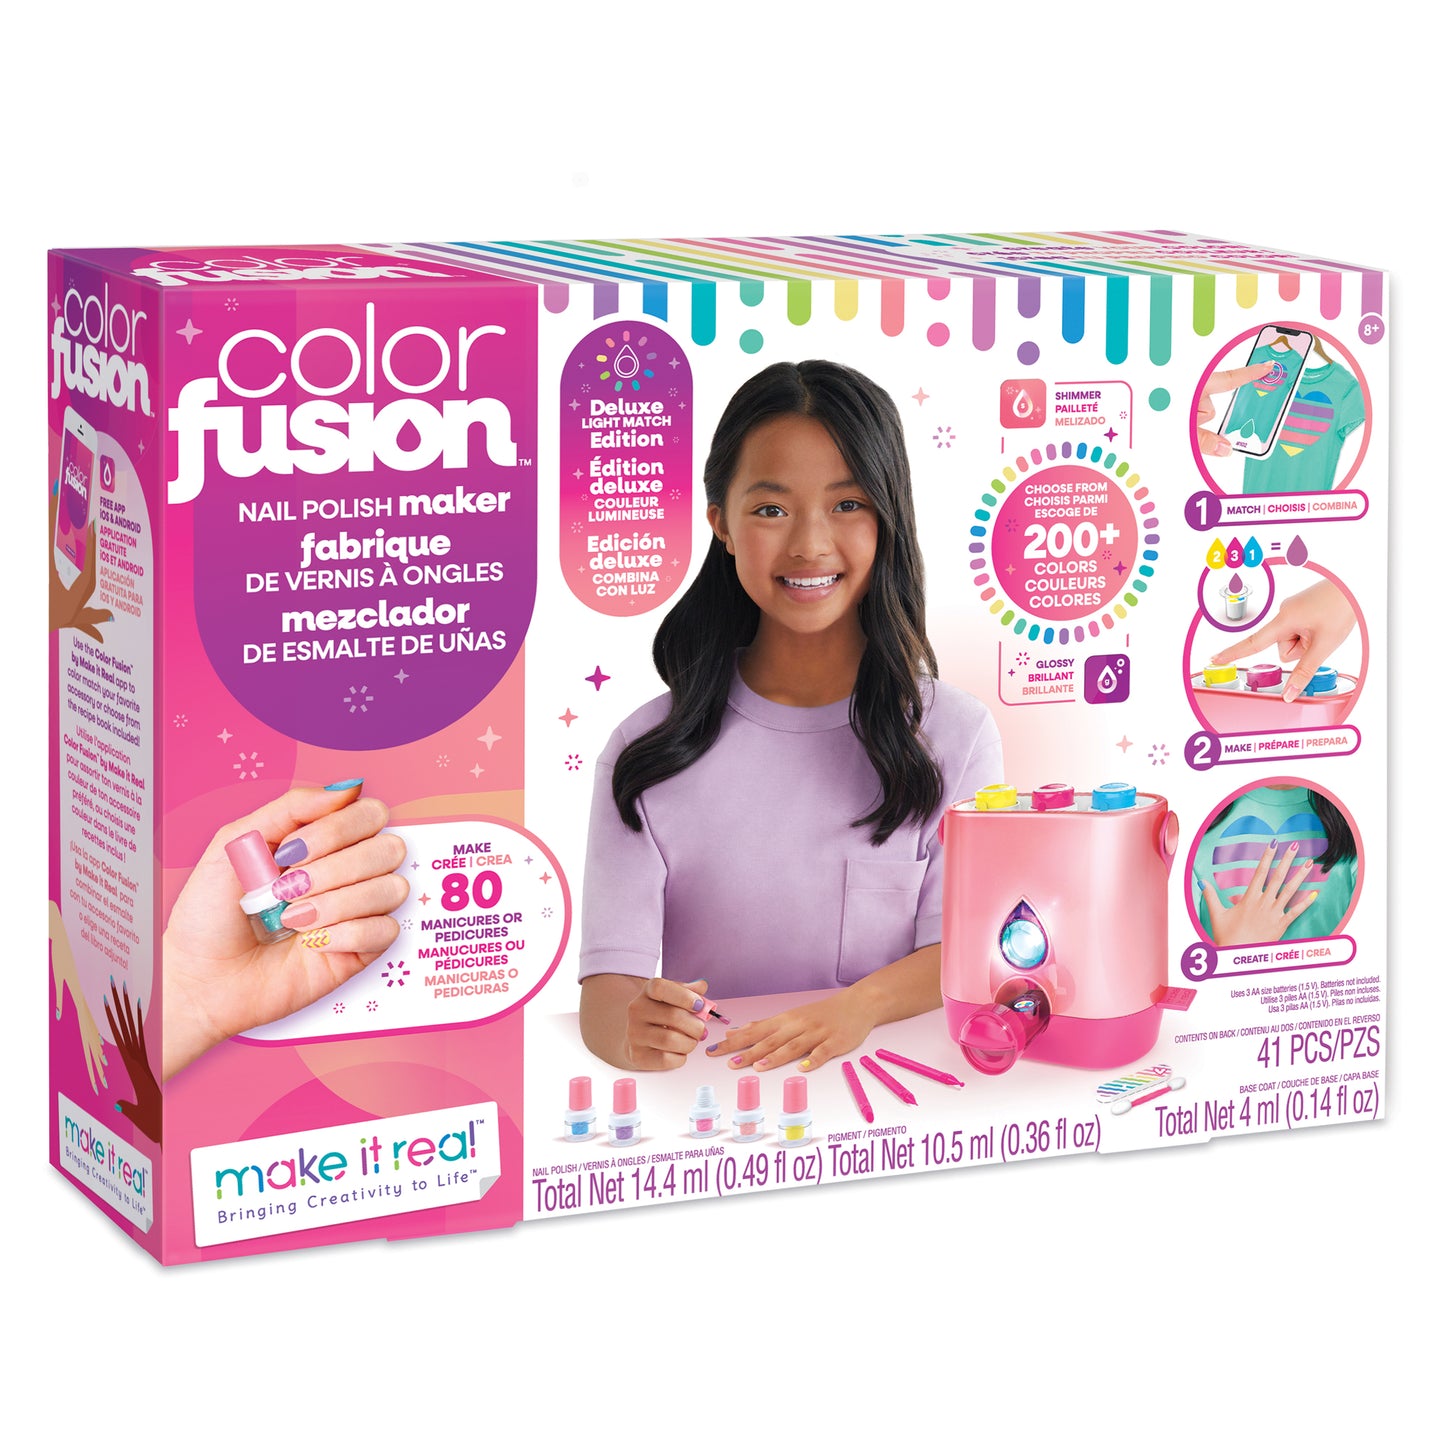 Color Fusion Nail Polish Maker Deluxe Light Match Edition